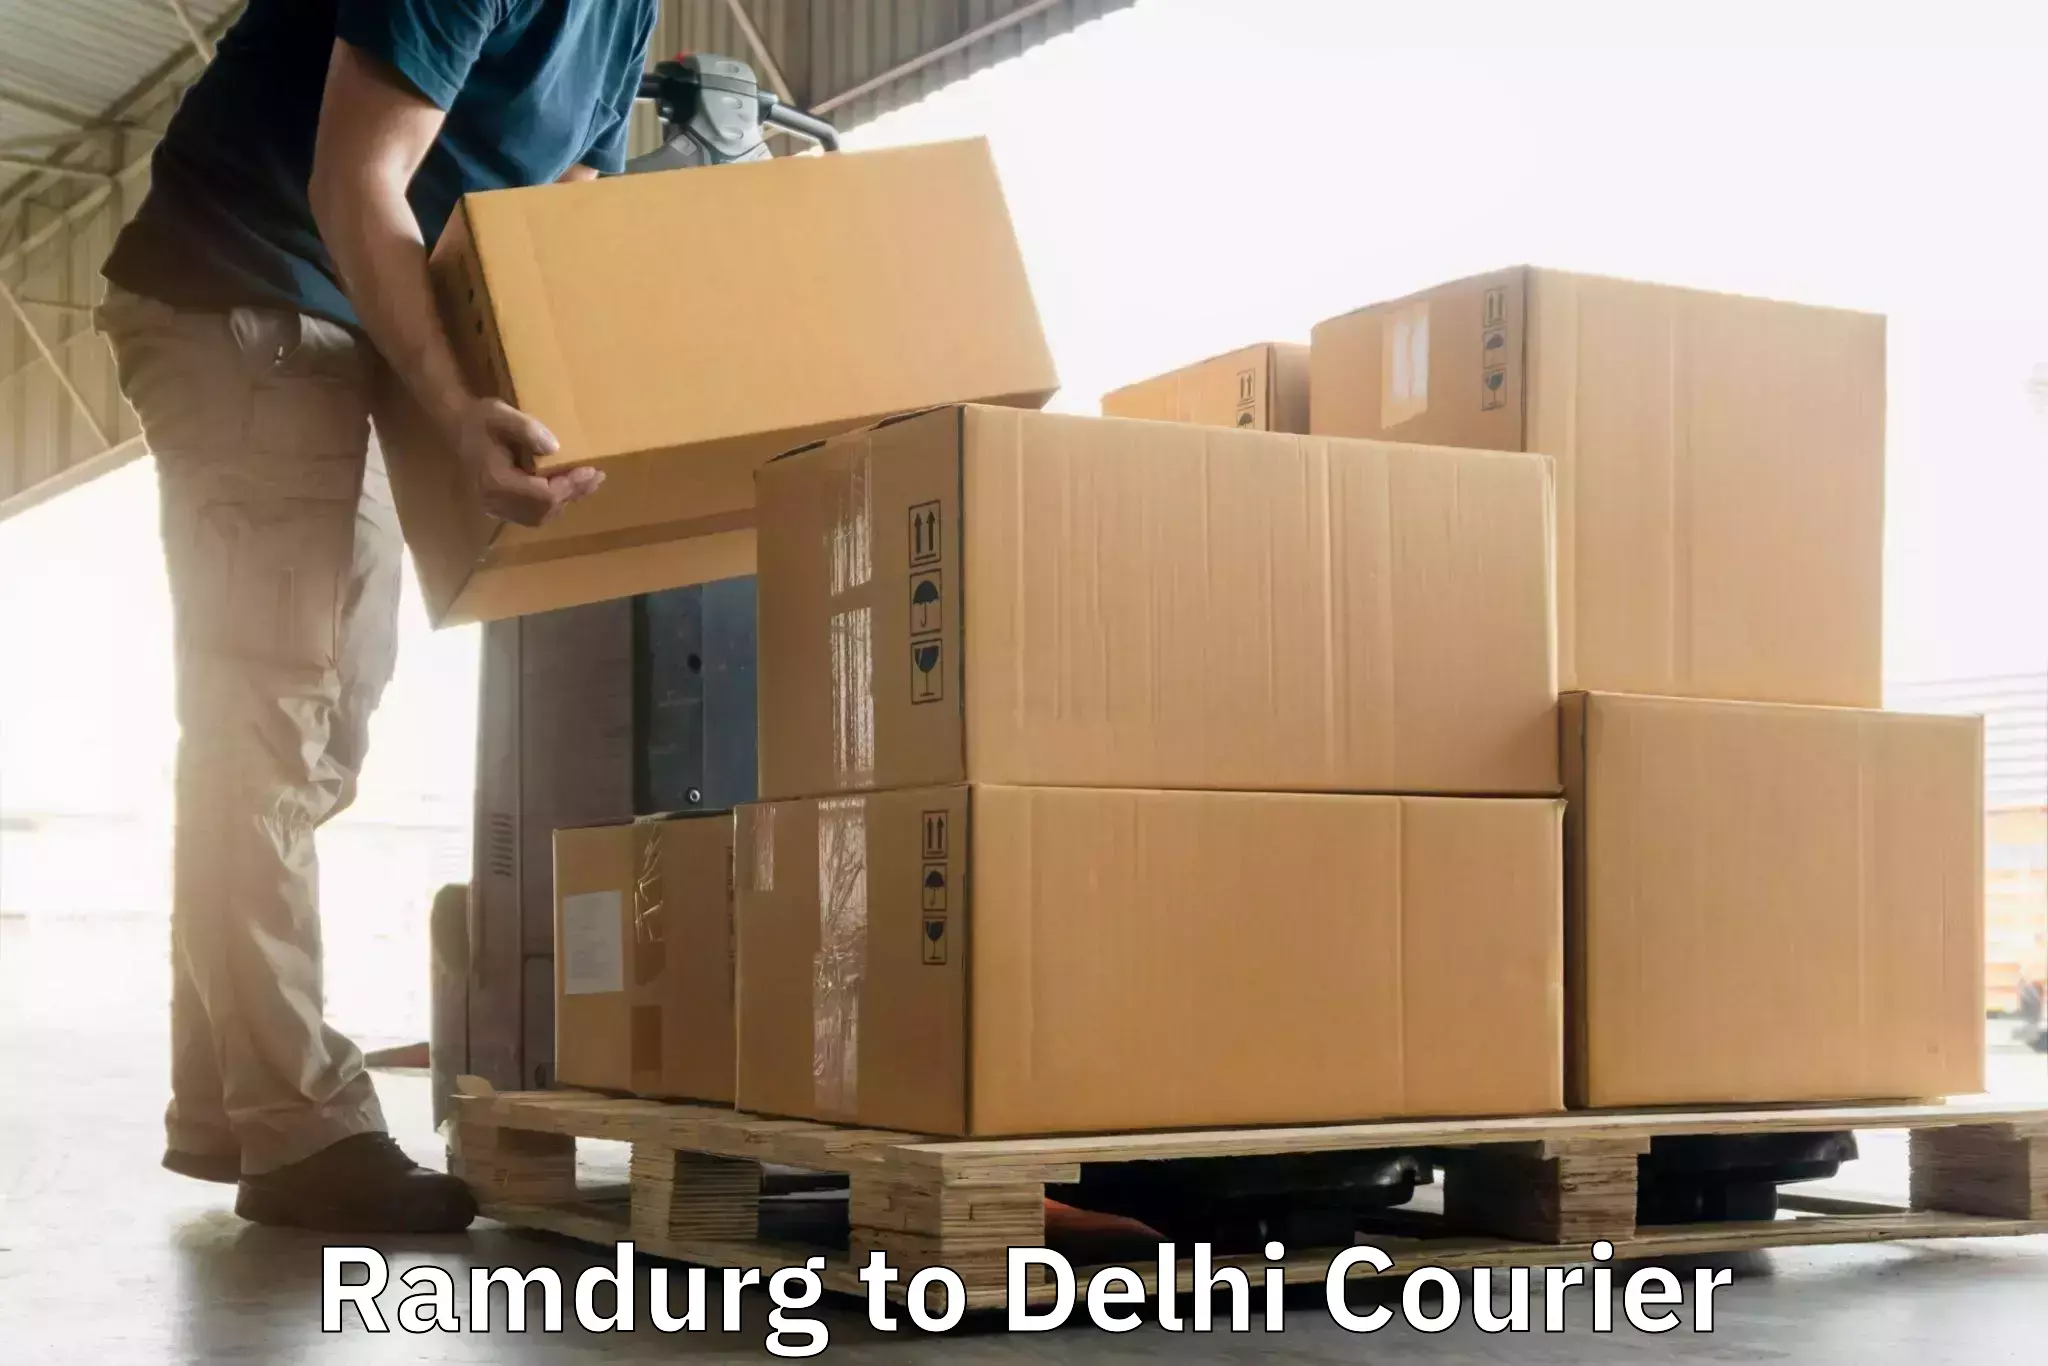 Optimized shipping routes in Ramdurg to University of Delhi